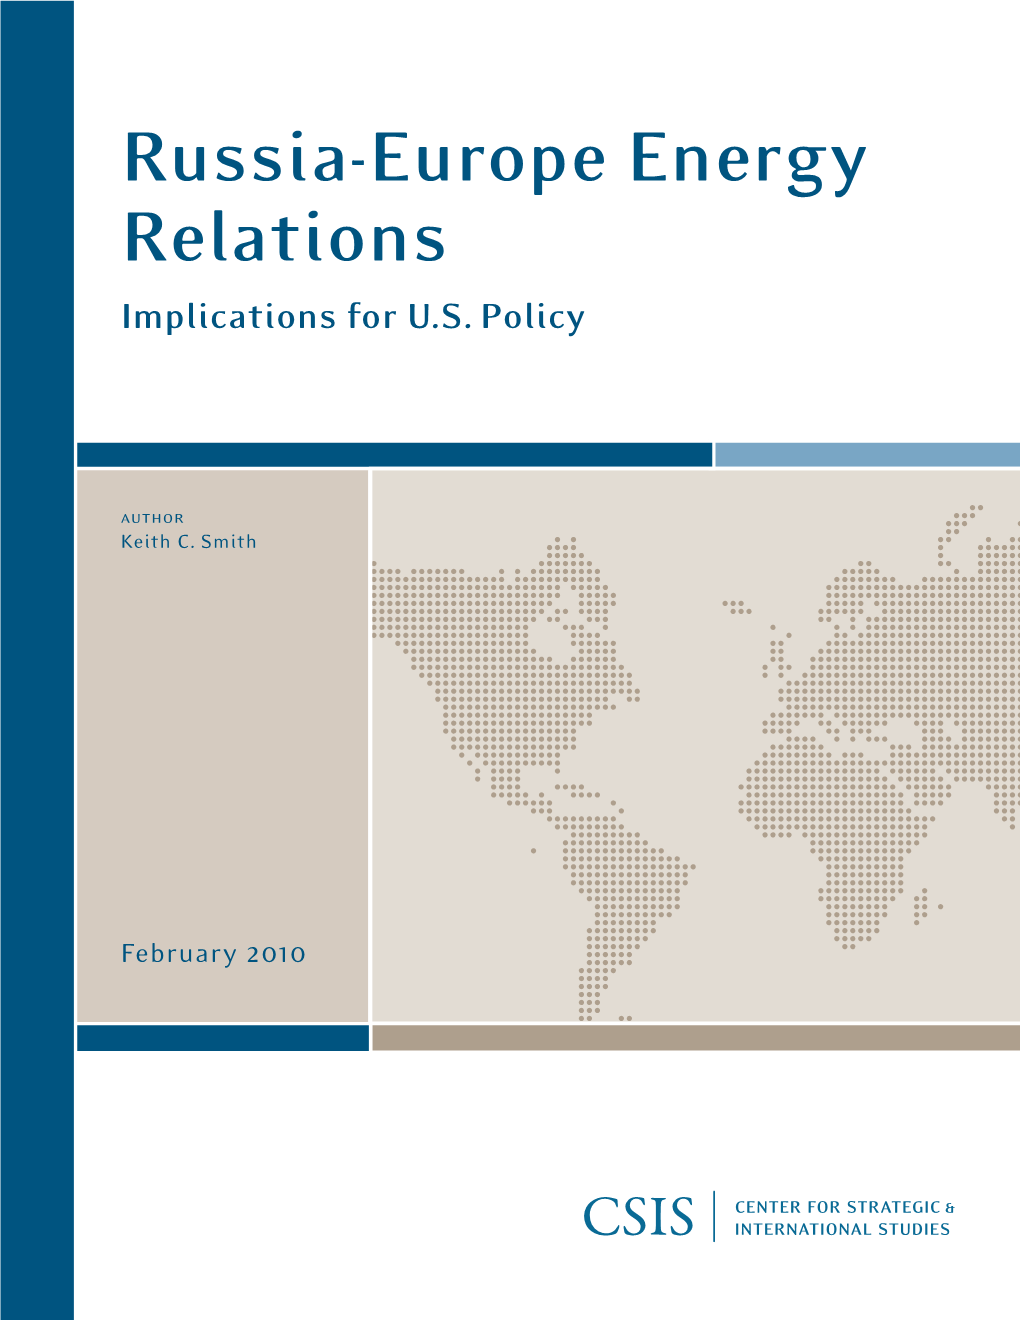 Russia-Europe Energy Relations: Implications for U.S. Policy 5